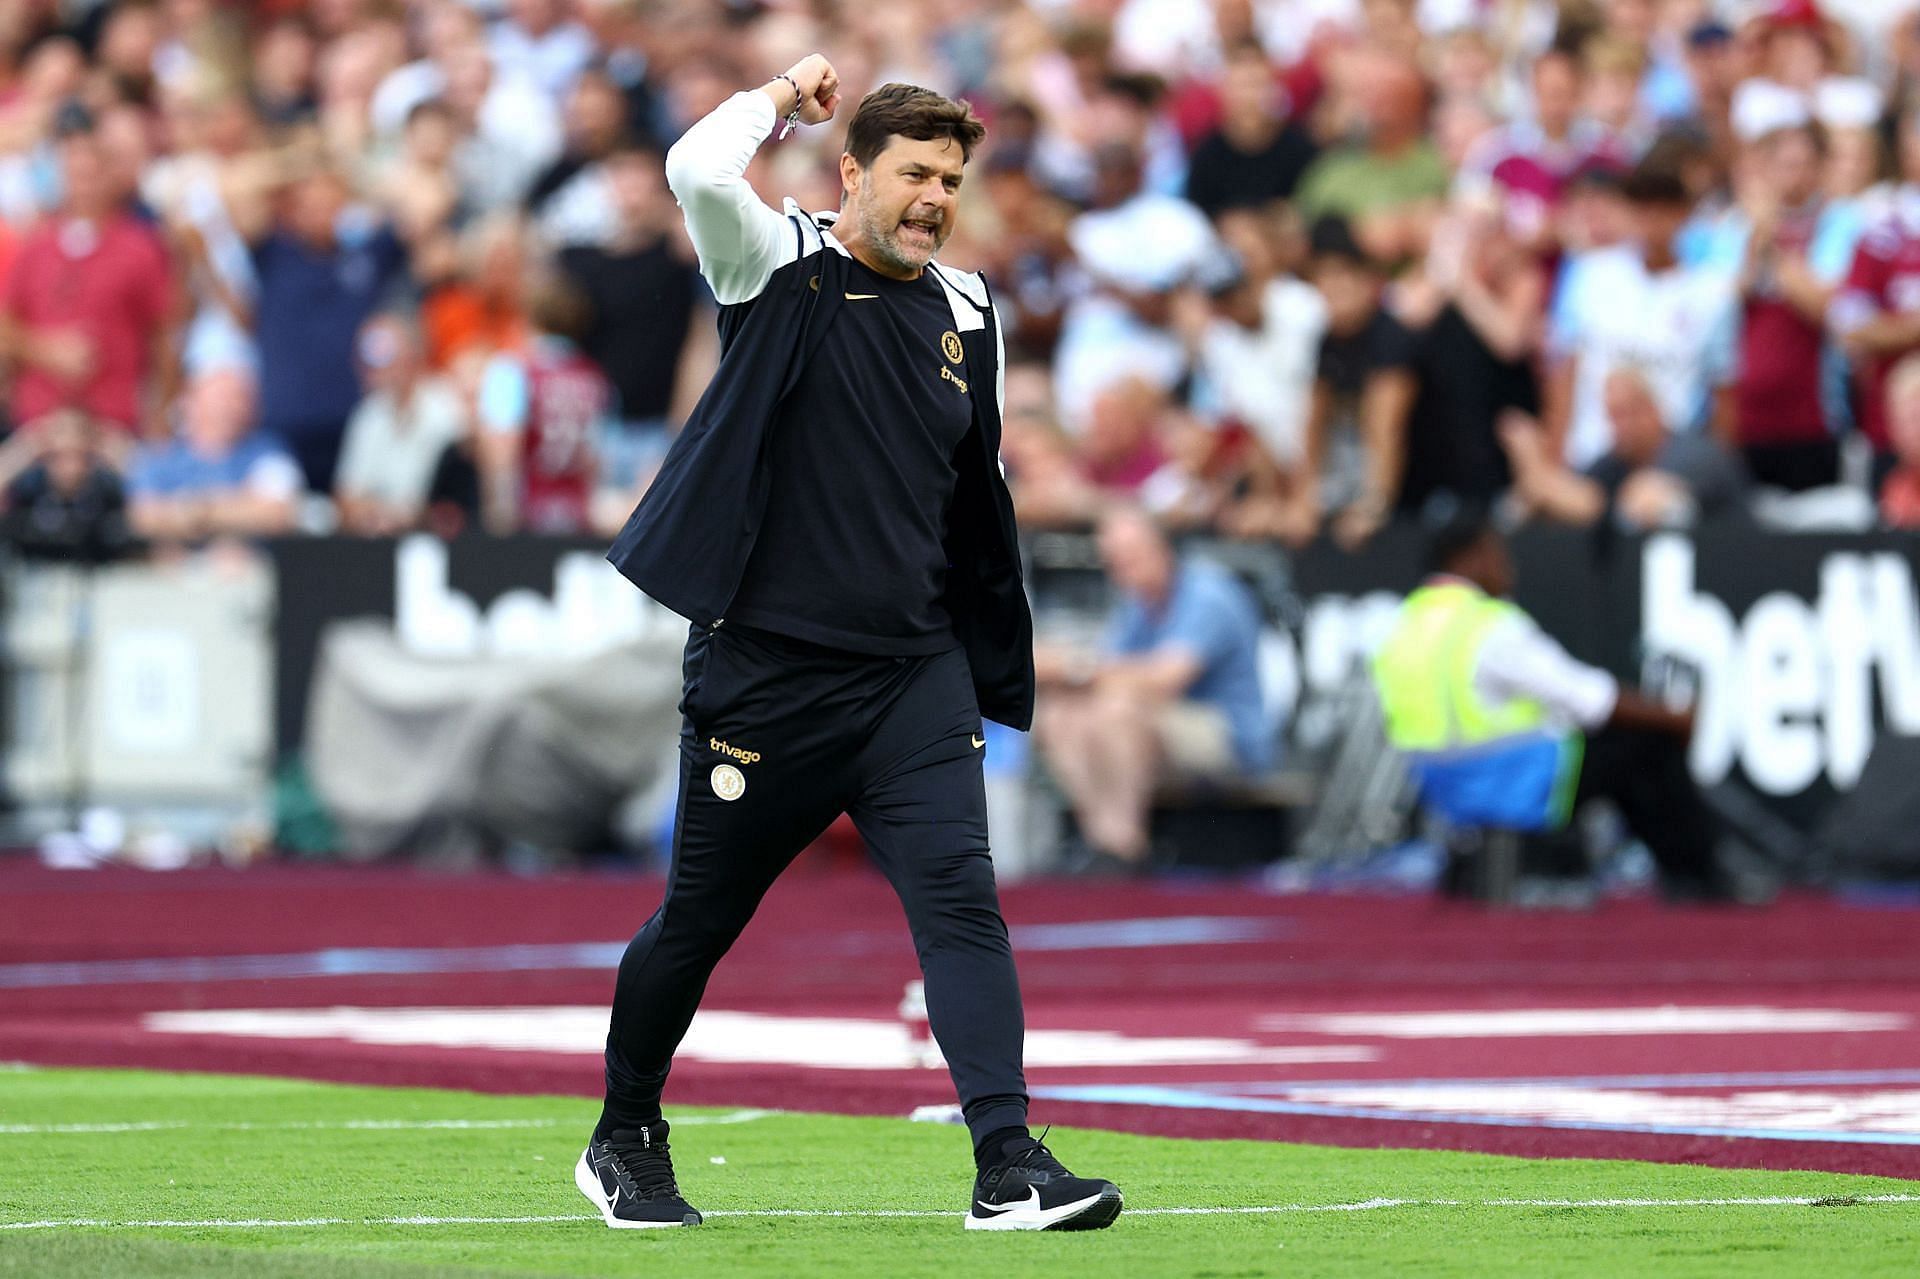 Pohettino took Spurs to a Champions League final back in 2019.